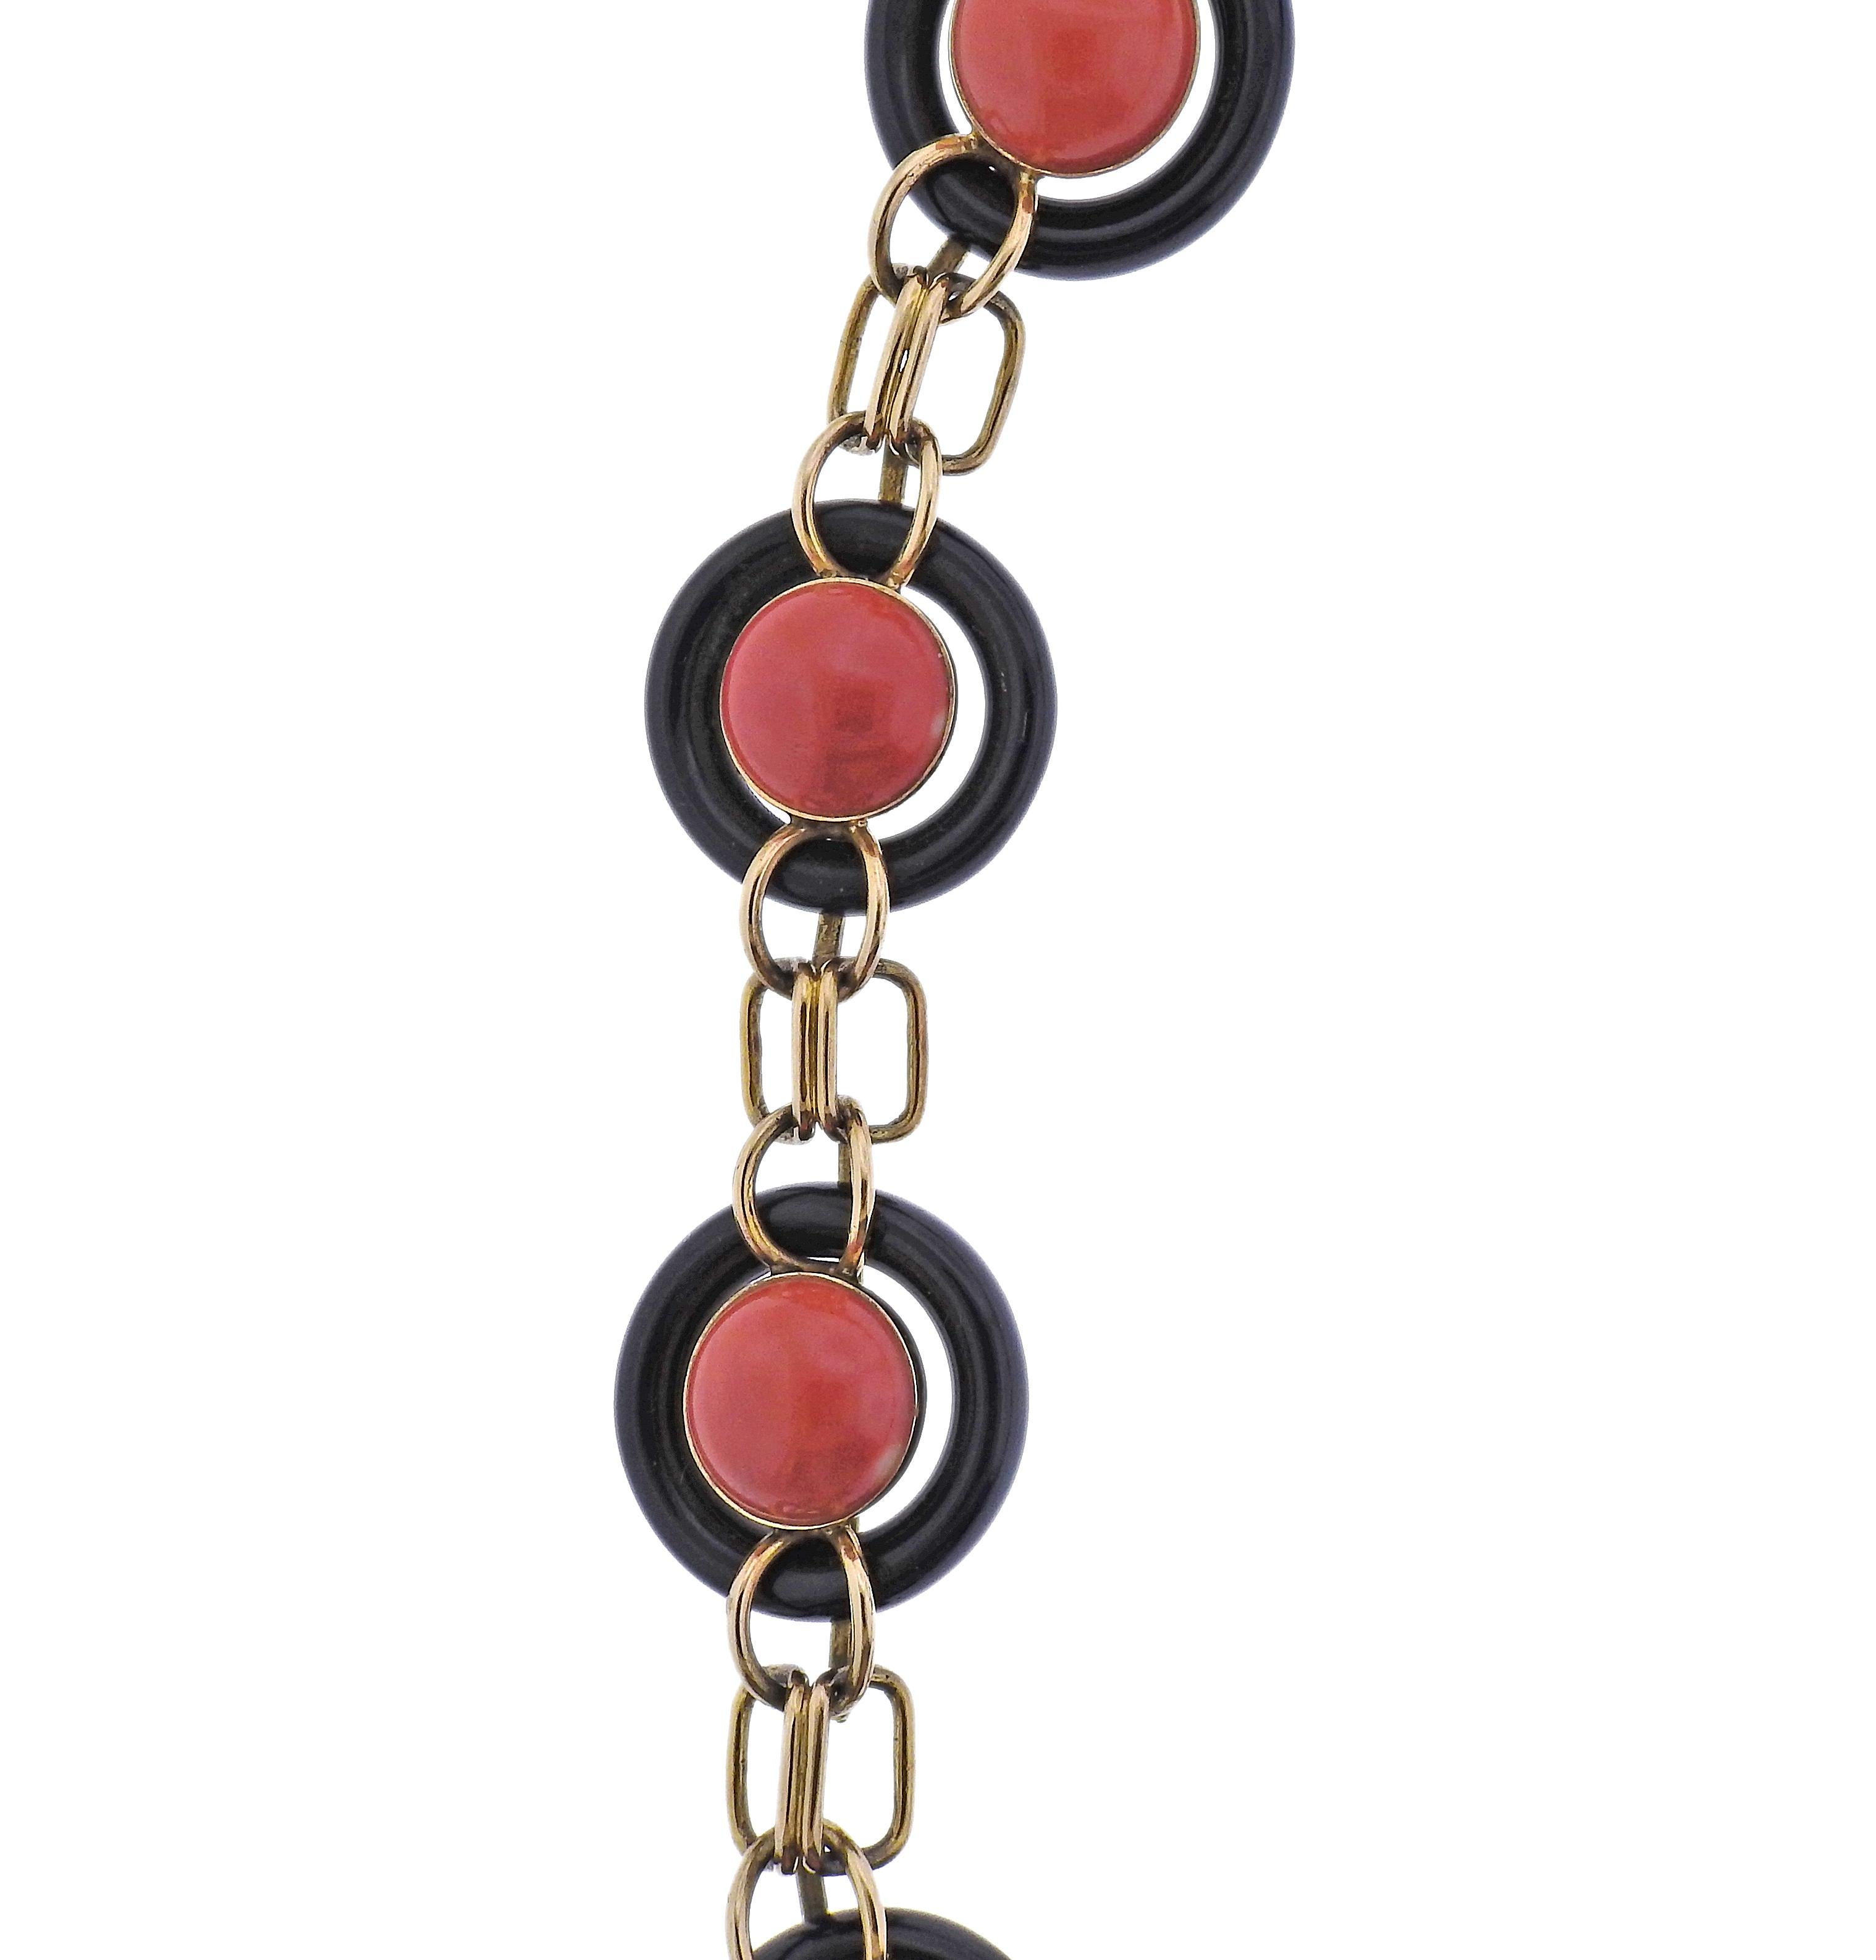 1970s 14k gold link necklace, with onyx and coral. Each link is 22mm in diameter, coral stones are 11mm in diameter. Necklace is 24